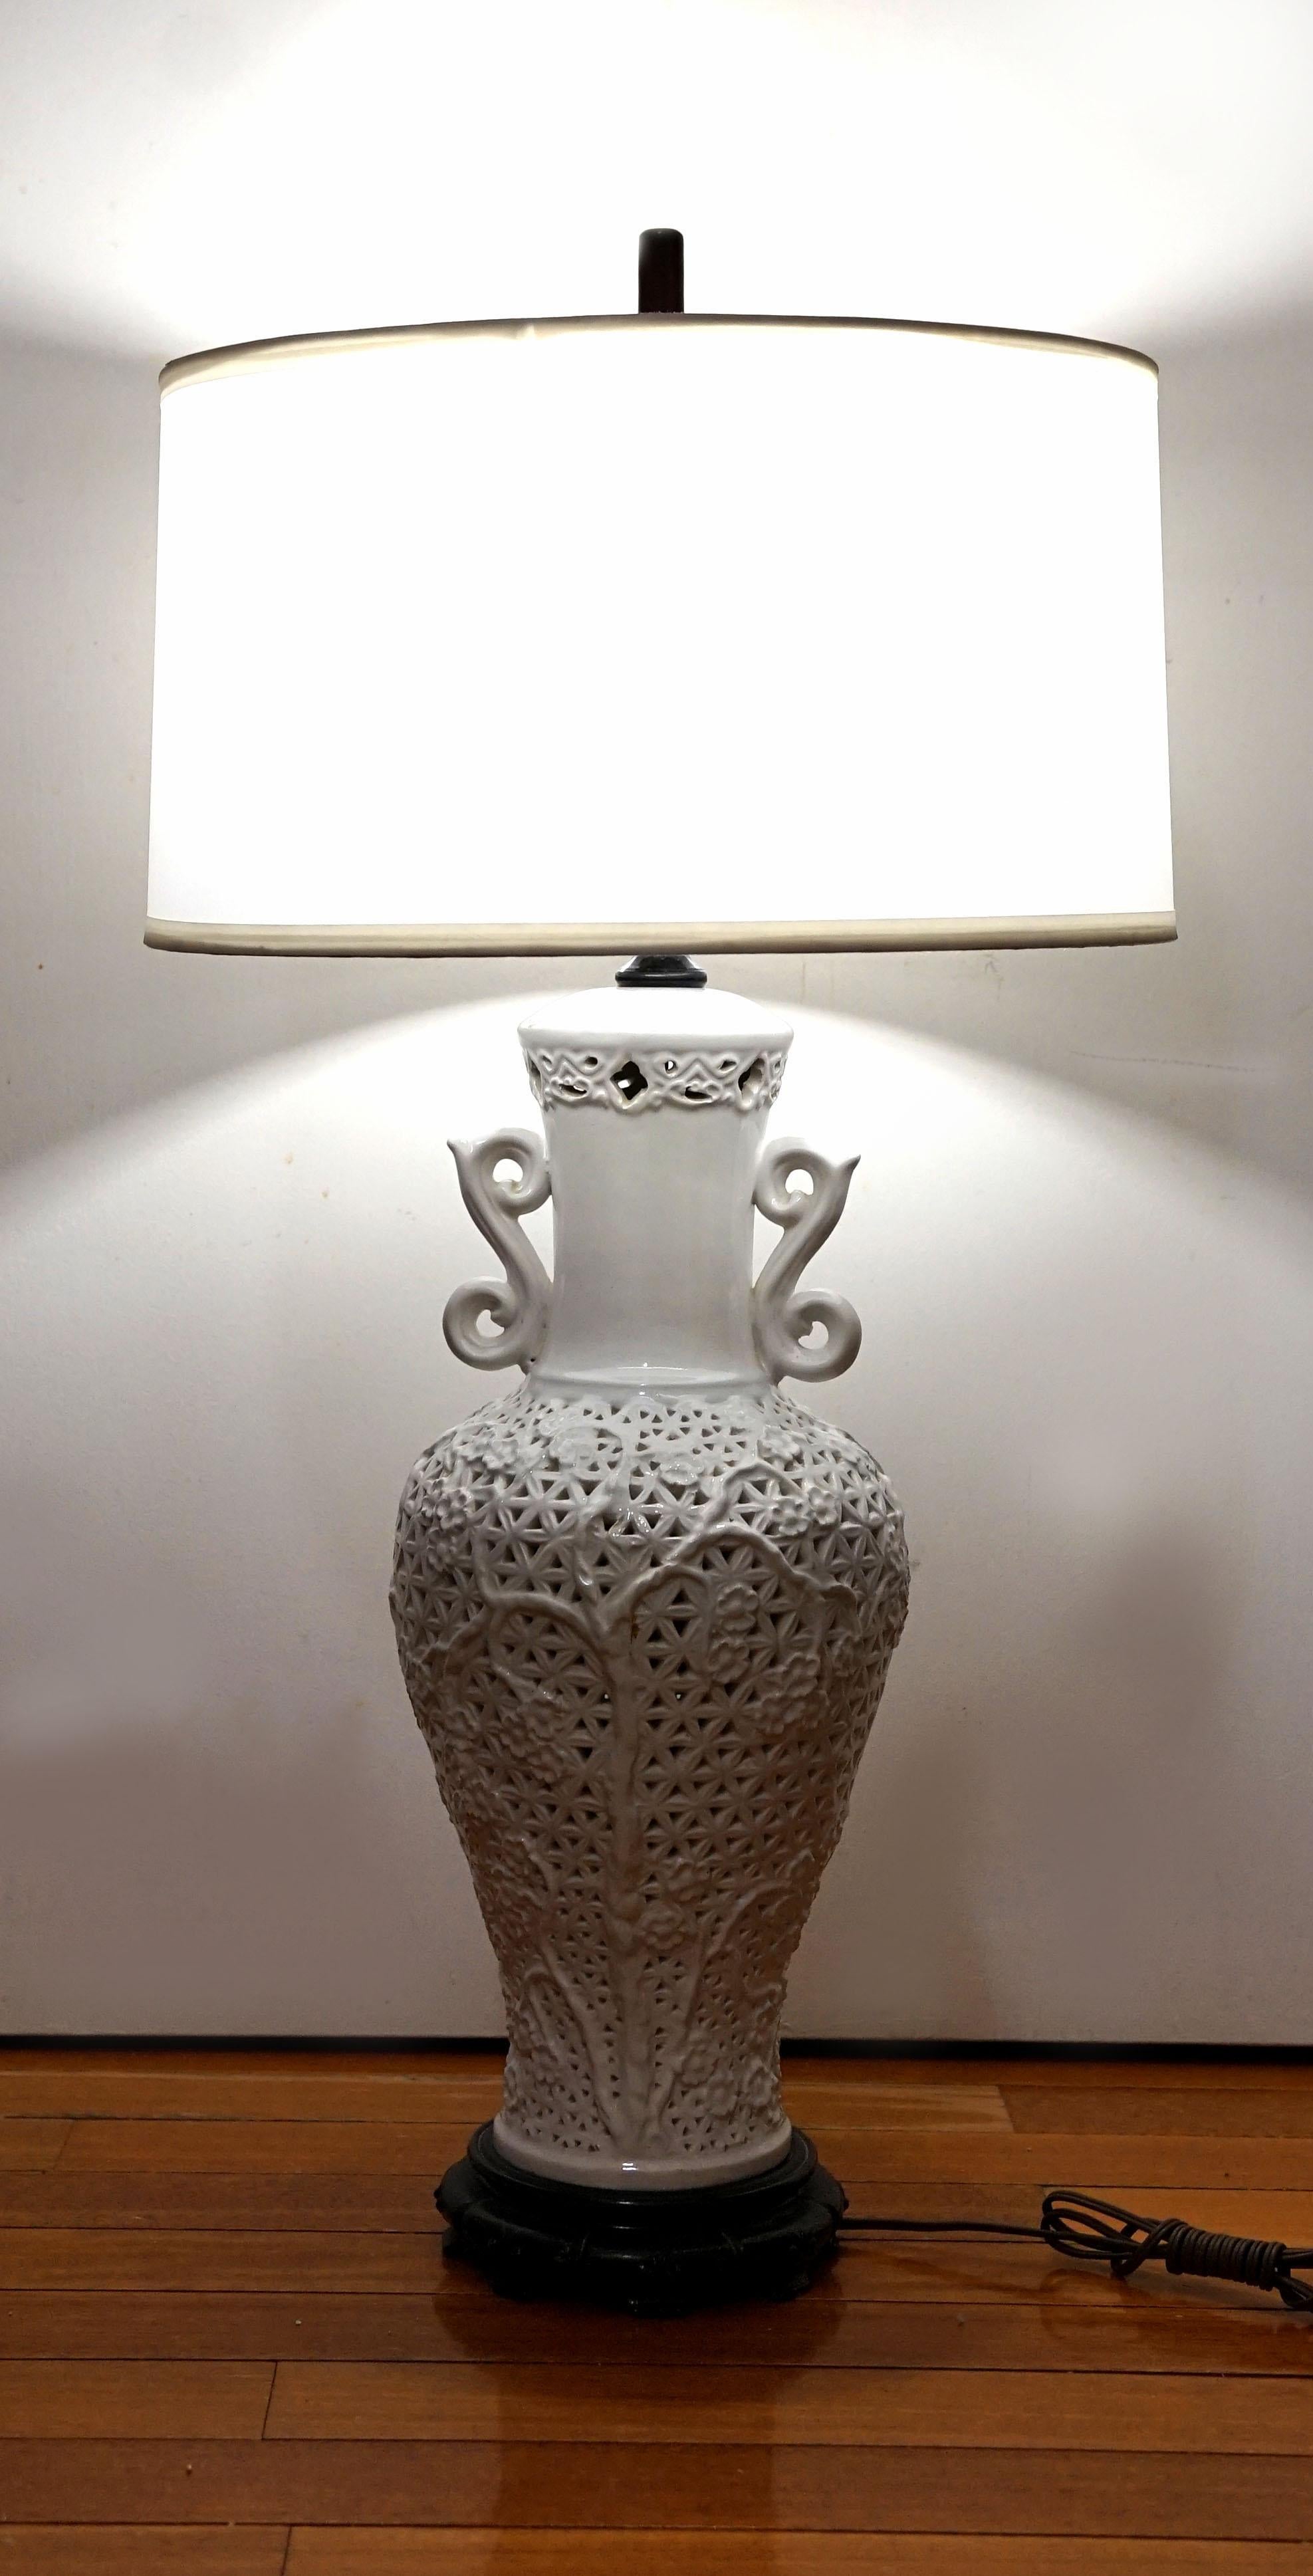 This is a Chinese Blanc de Chine White Porcelain vase form lamp, dating back to the period between 1960-1990.. The silhouette in pierced white porcelain--blanc de chine--the scroll ears, and the silk white barrel lamp shade make this an elegant